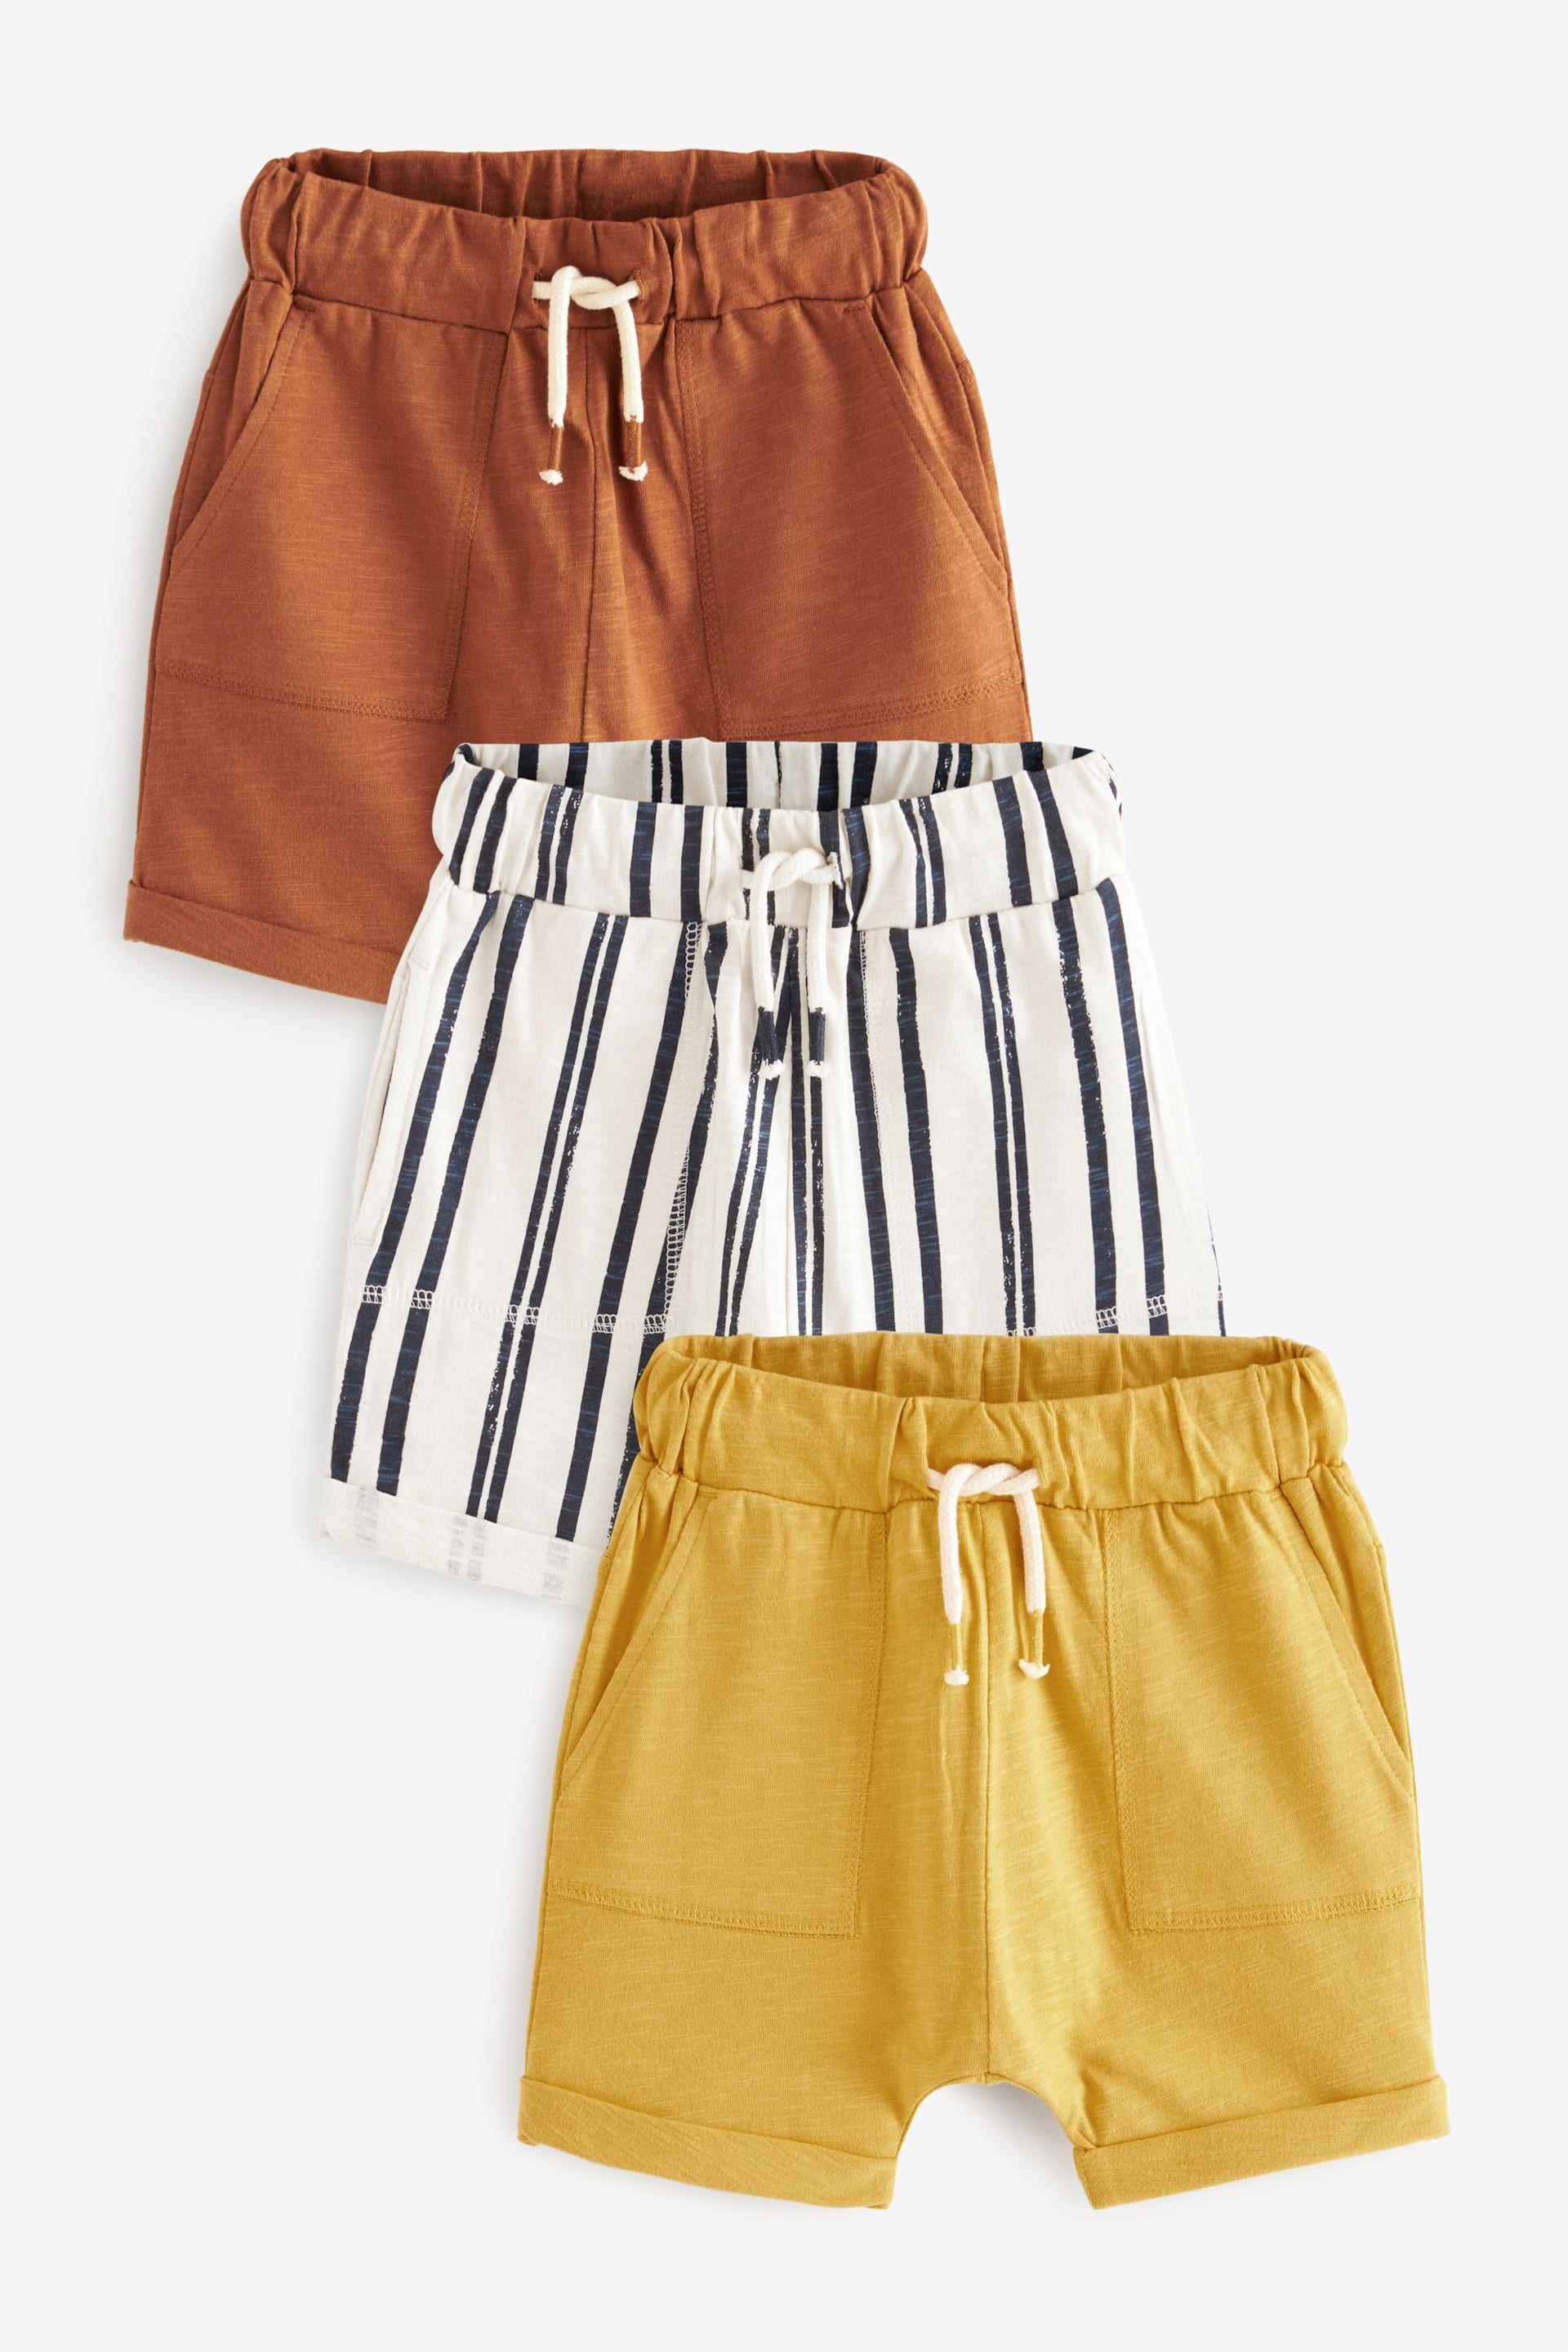 Ochre Yellow Stripe All Over Print Lightweight Jersey Shorts 3 Pack (3mths-7yrs) - Image 1 of 6